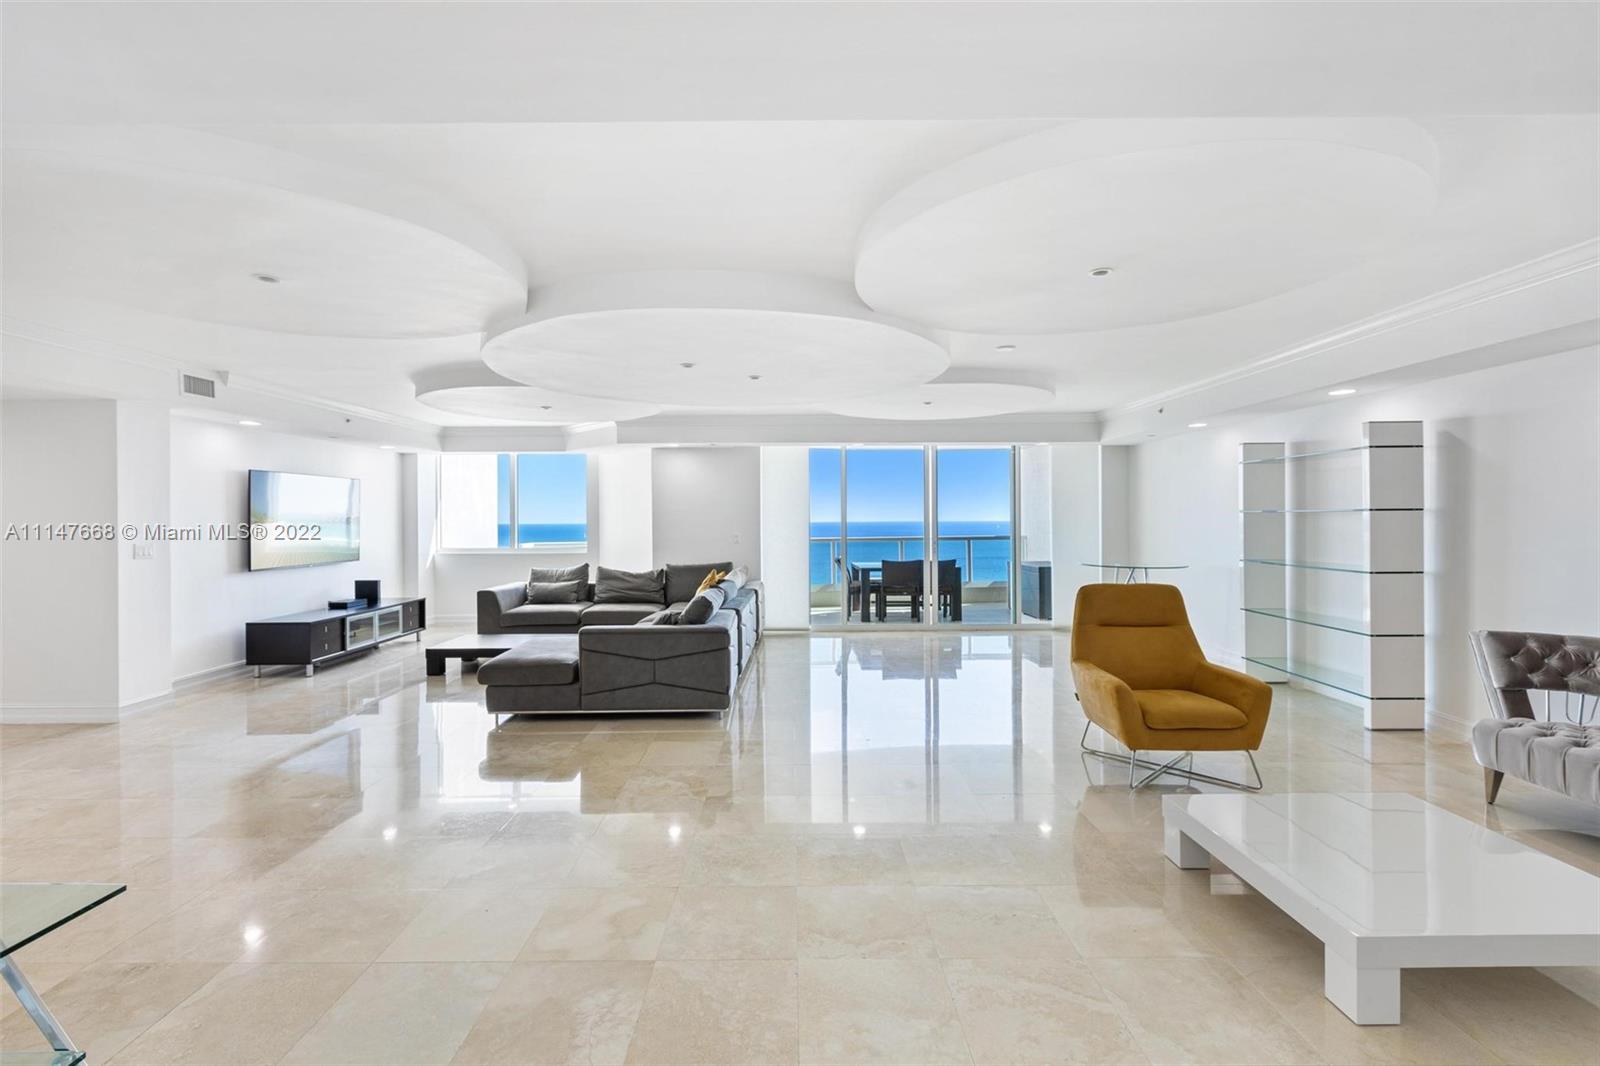 Just Reduced...Amazing Unique Double Unit in one of the most desirable building in Aventura. Unit 2606 and 2607 combined for a  large 5,953 SF (6 Beds + 5.5 Baths), incredible unobstructed ocean and skyline views from the 26th Floor. Extra large master suite with balcony with 2 large closets and 2 large baths. Dinning Room for 14 people. A lot of storage spaces, maids quarter, laundry room. Hamptons South is a 5 Star Complex in the Heart of Aventura with great amenities including Tennis Courts, Gym and Restaurant, close to Aventura Mall, House of Worship and great Private and Charter Schools. MUST SEE !!!!